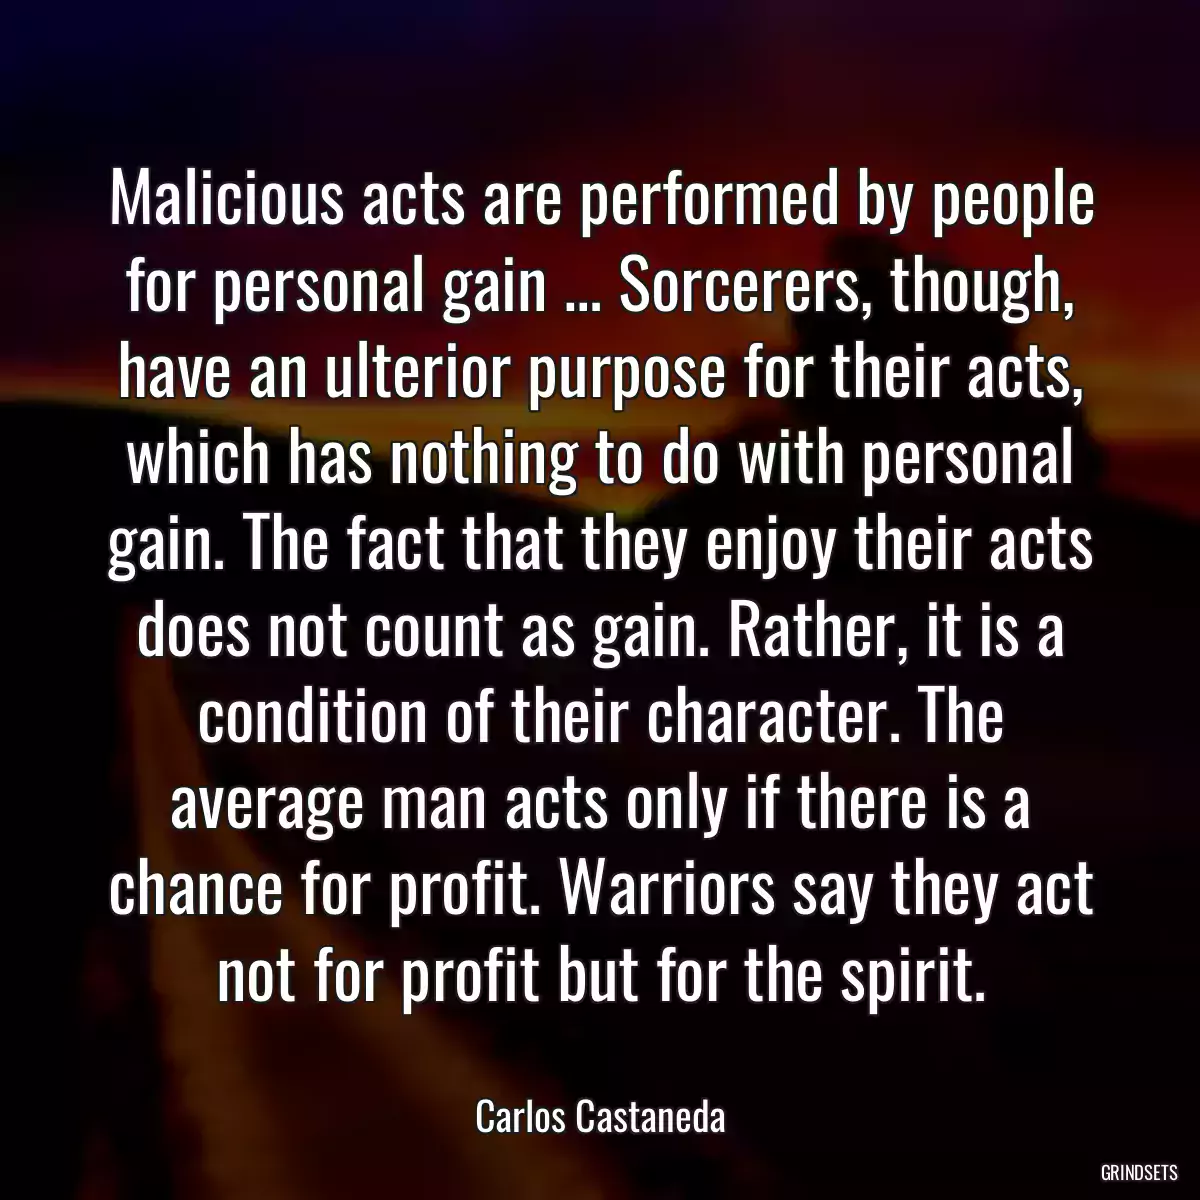 Malicious acts are performed by people for personal gain … Sorcerers, though, have an ulterior purpose for their acts, which has nothing to do with personal gain. The fact that they enjoy their acts does not count as gain. Rather, it is a condition of their character. The average man acts only if there is a chance for profit. Warriors say they act not for profit but for the spirit.